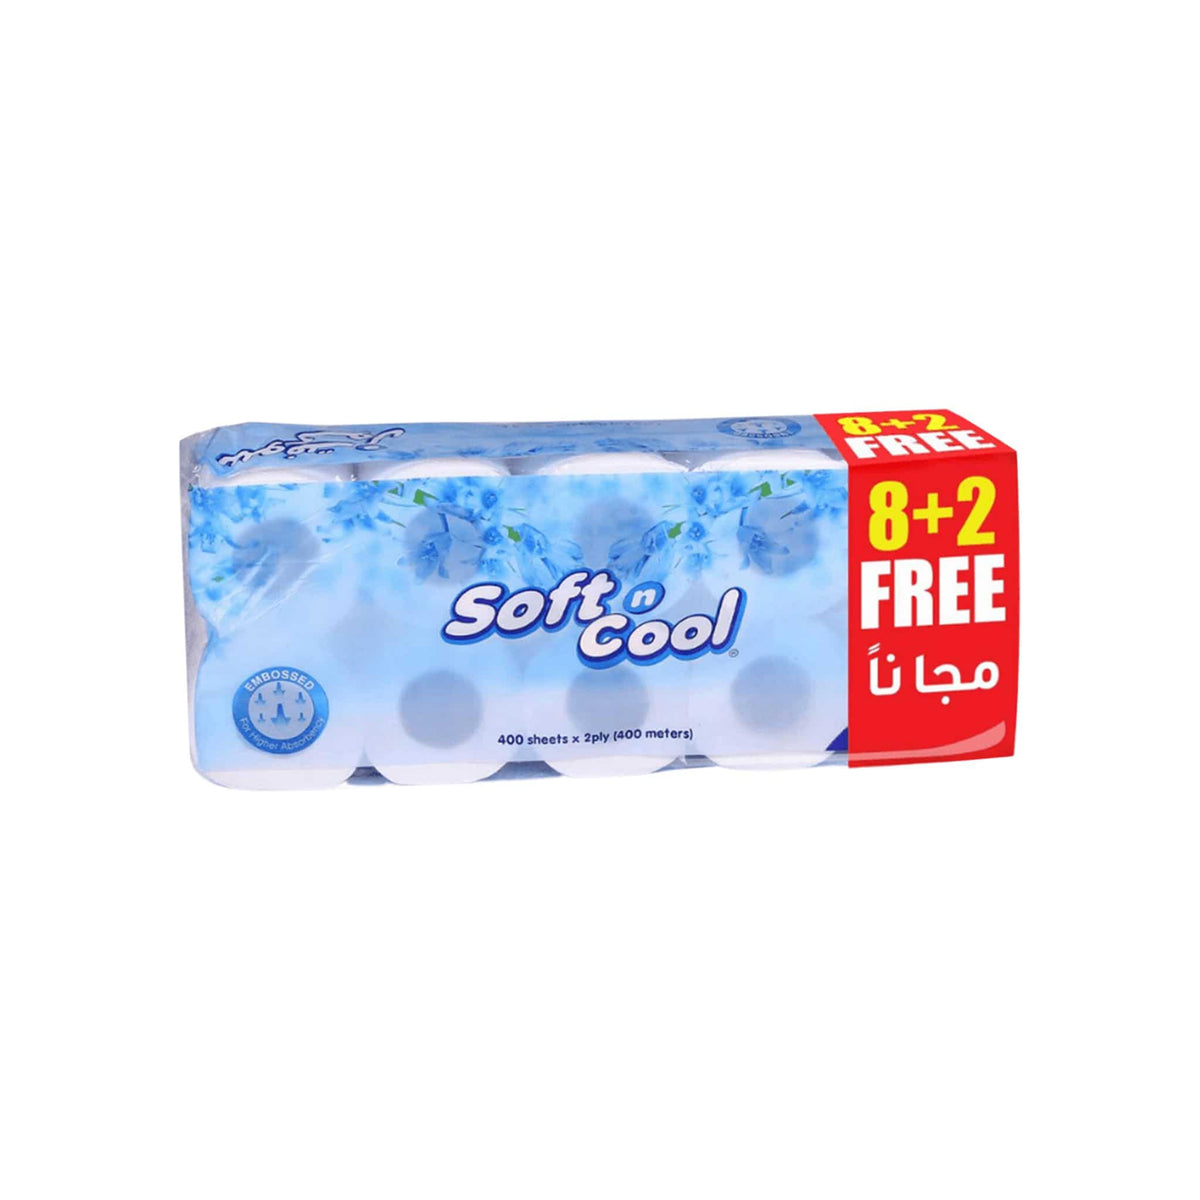 Soft n Cool Toilet Rolls 400 Sheets x 2 Ply 10 Rolls - Hotpack Global